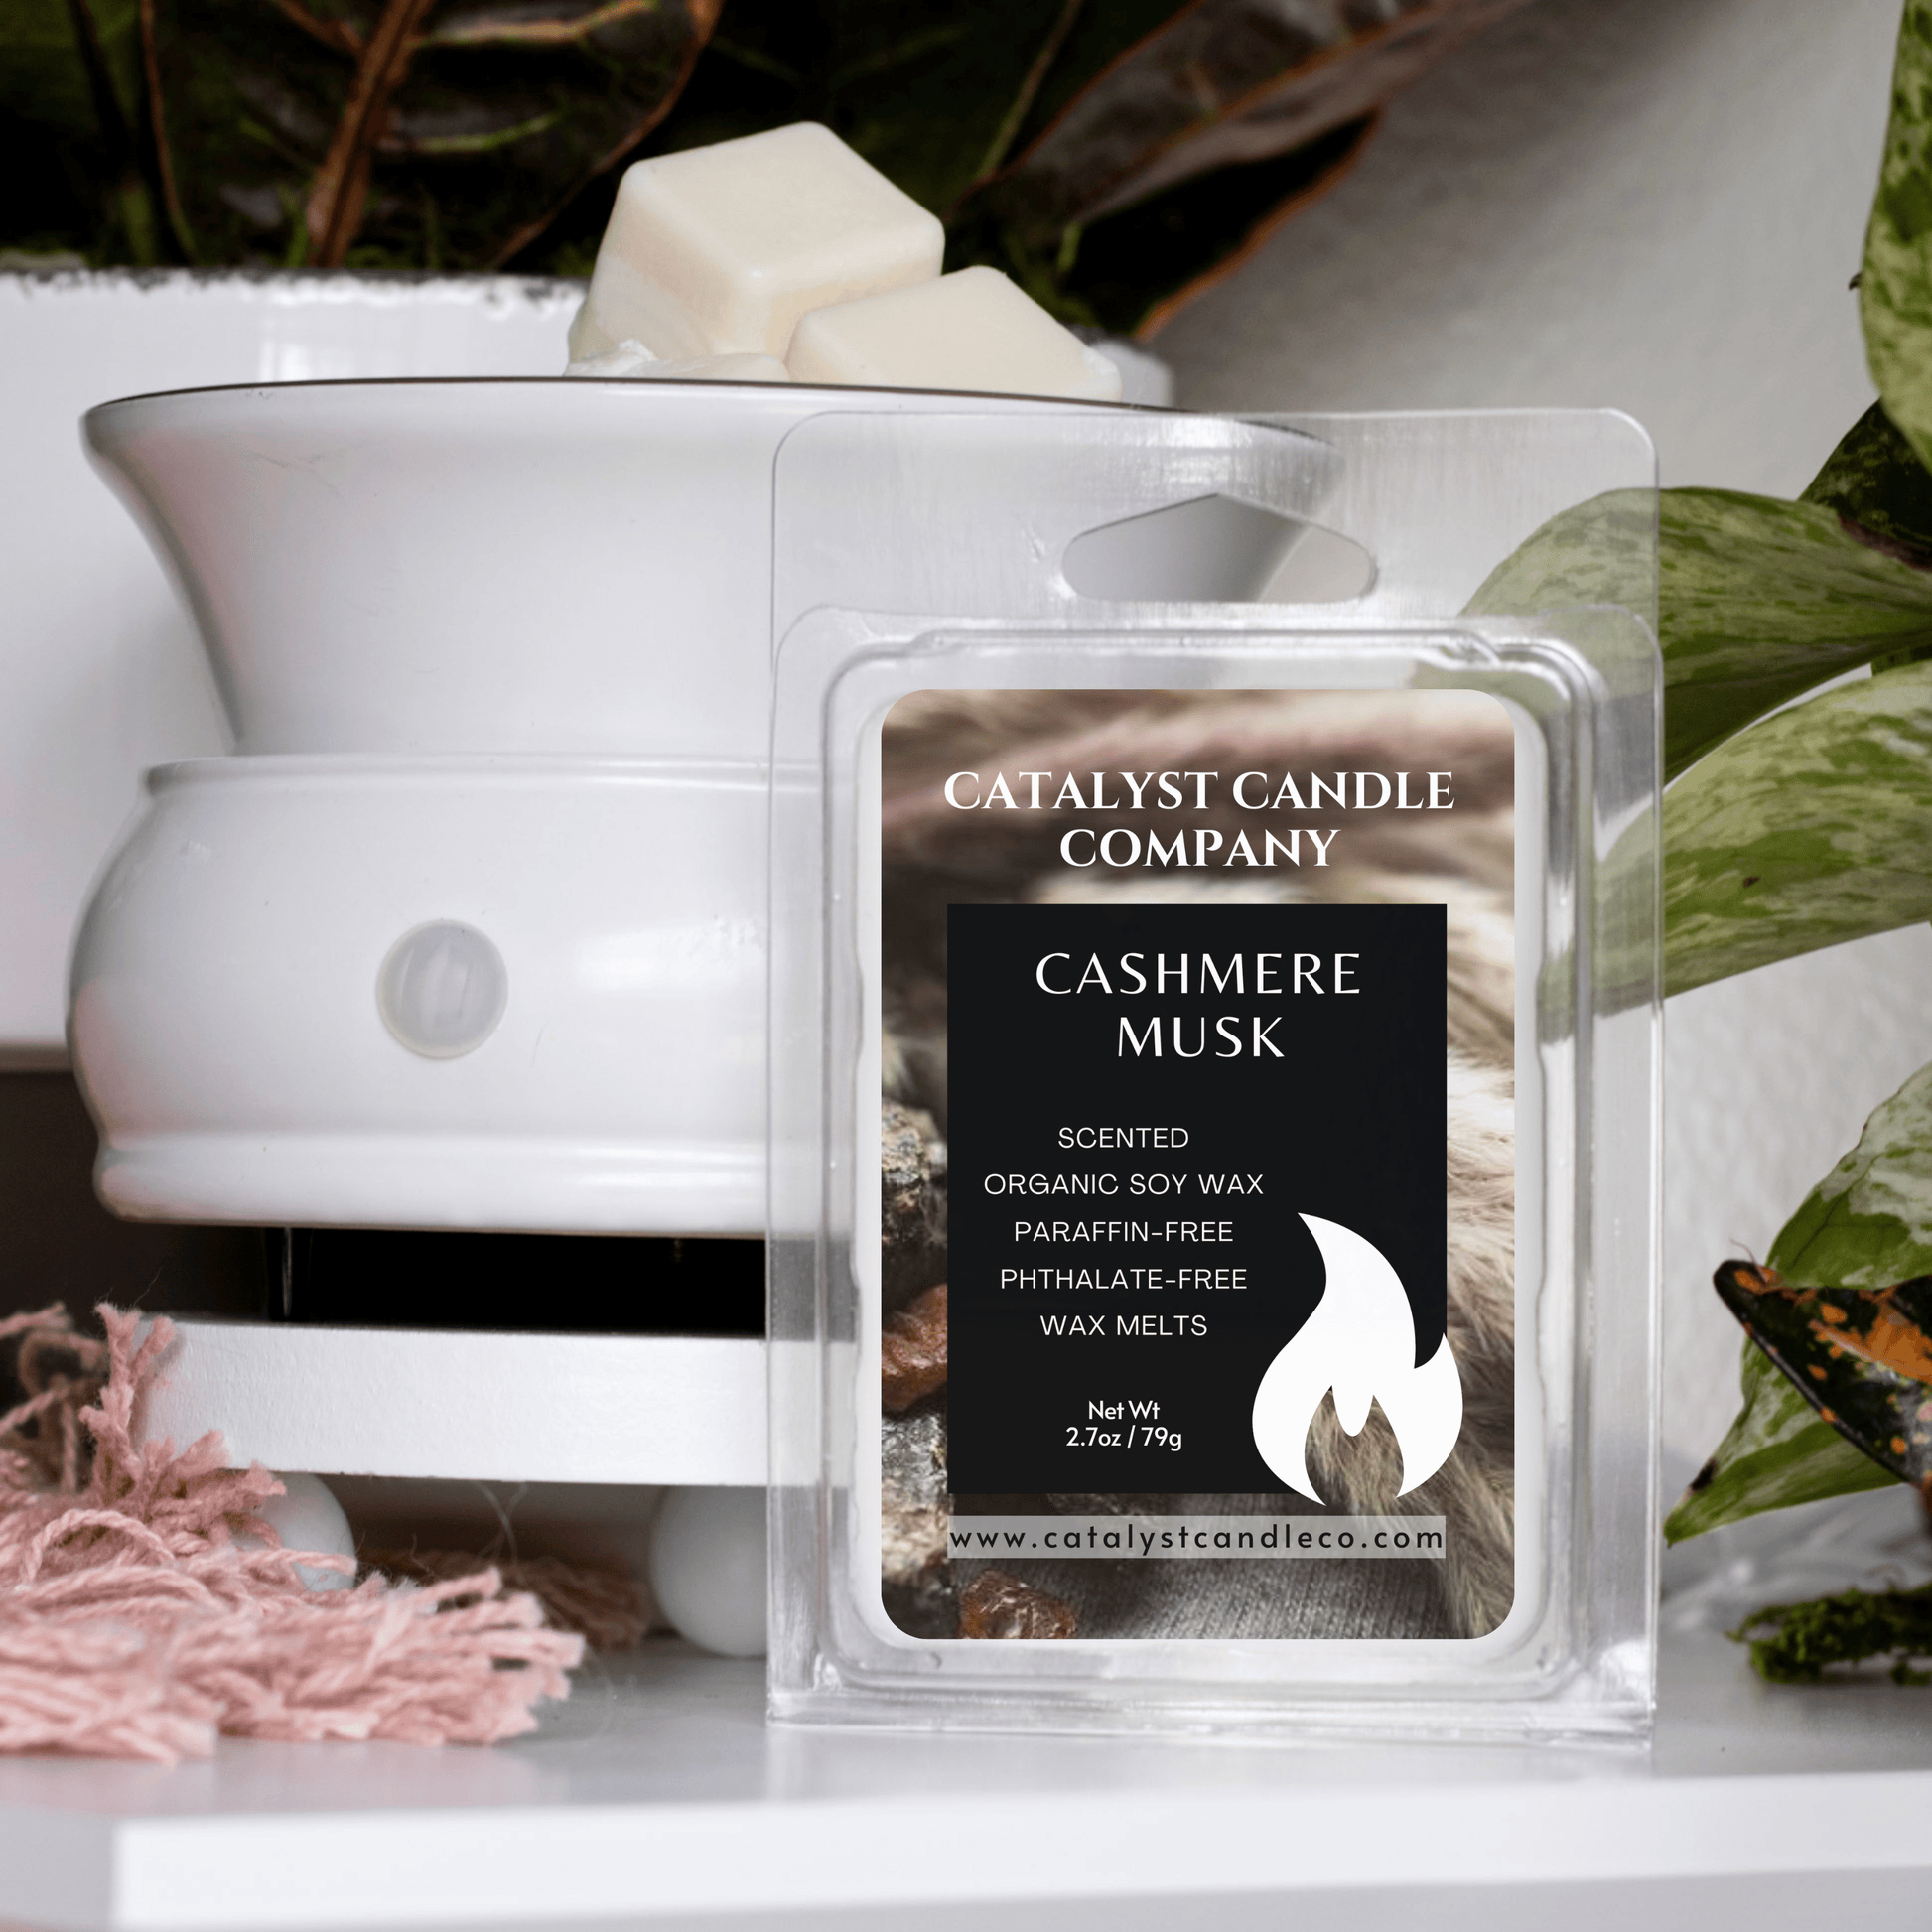 Cashmere Musk scented wax melt. Perfume aroma. Soy wax melts. soy wax tart. Catalyst Candle Company, LLC